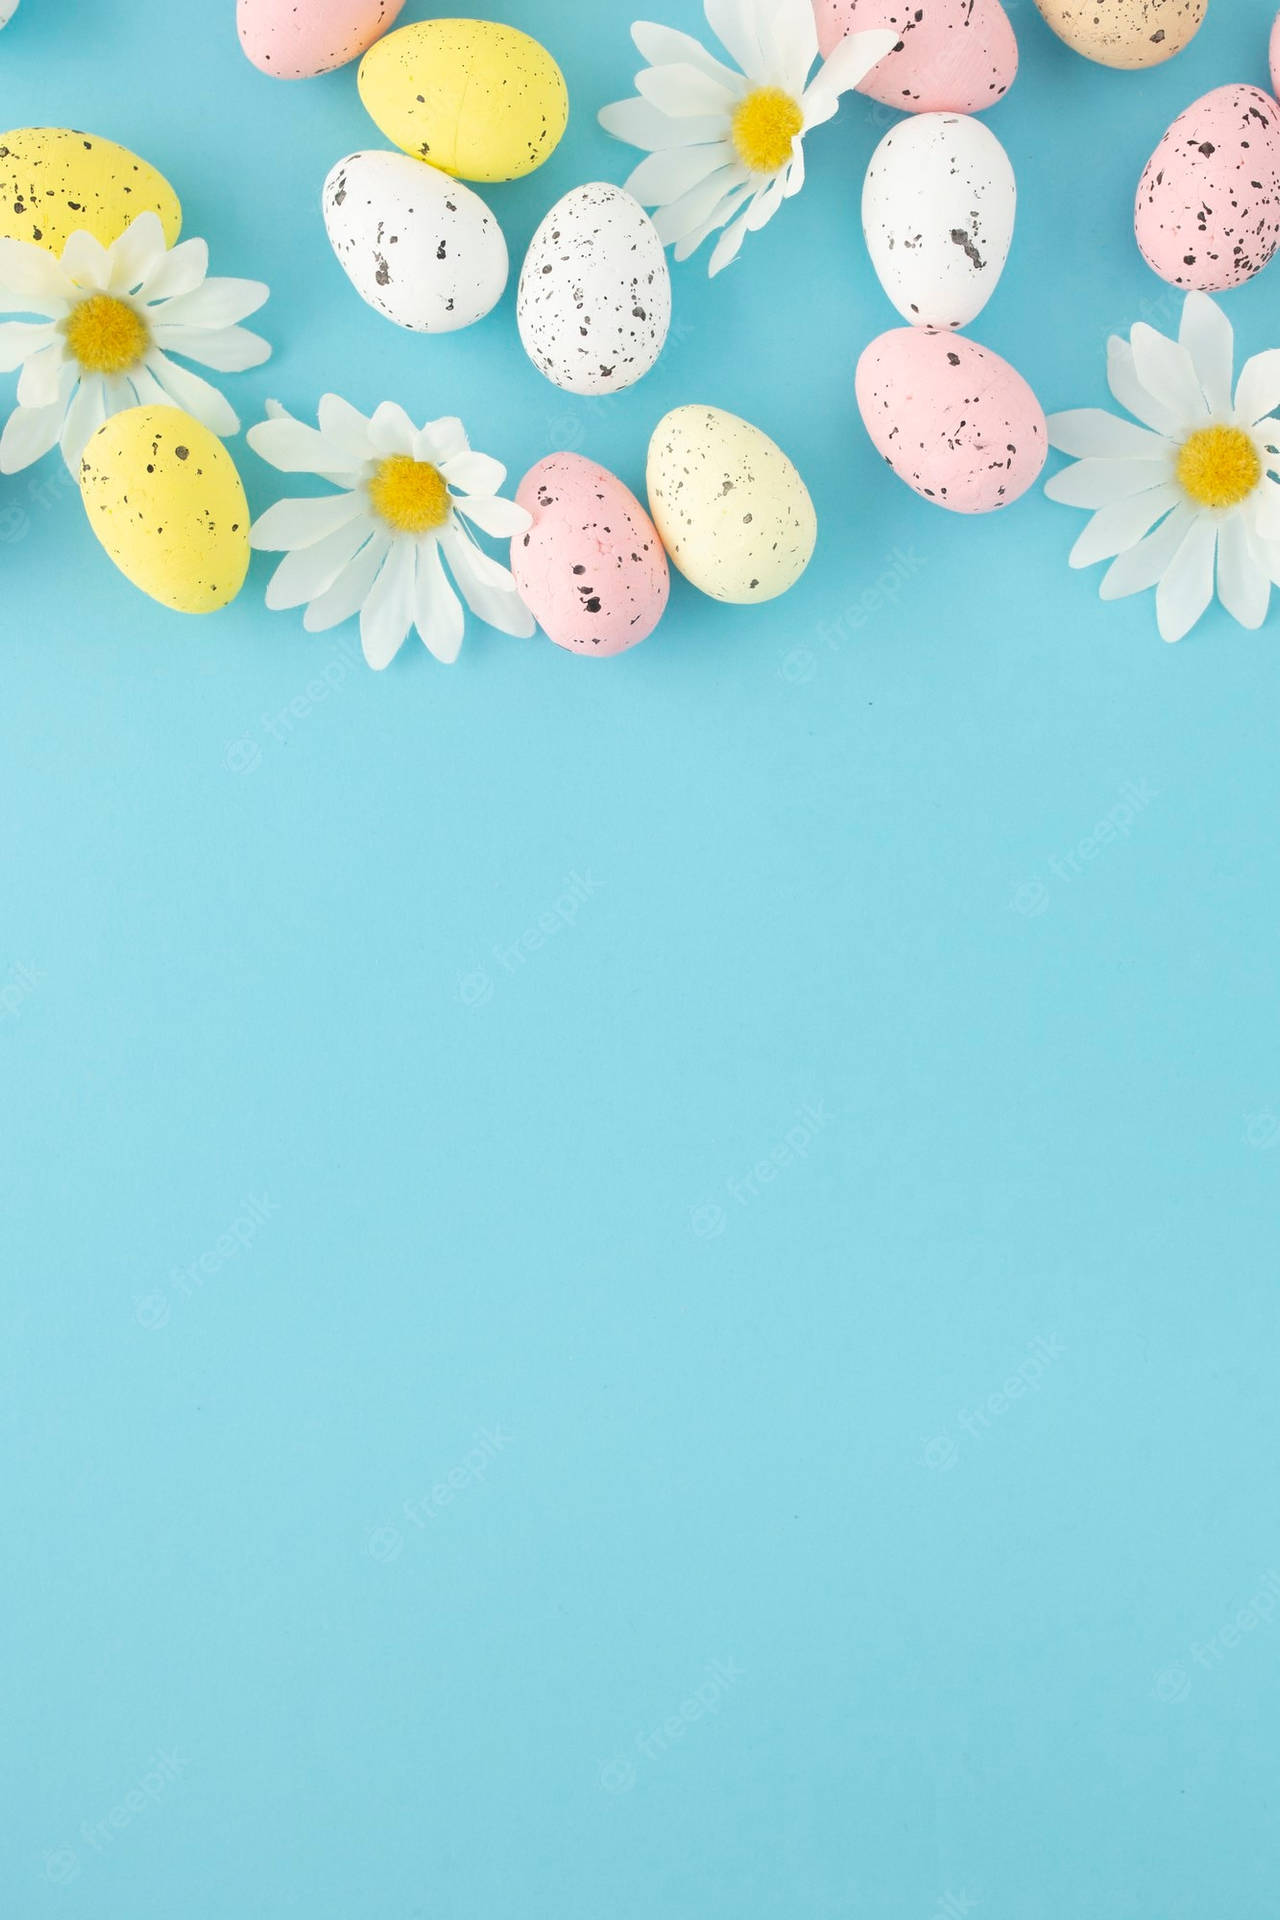 Colorful Easter Eggs On Blue Background Wallpaper